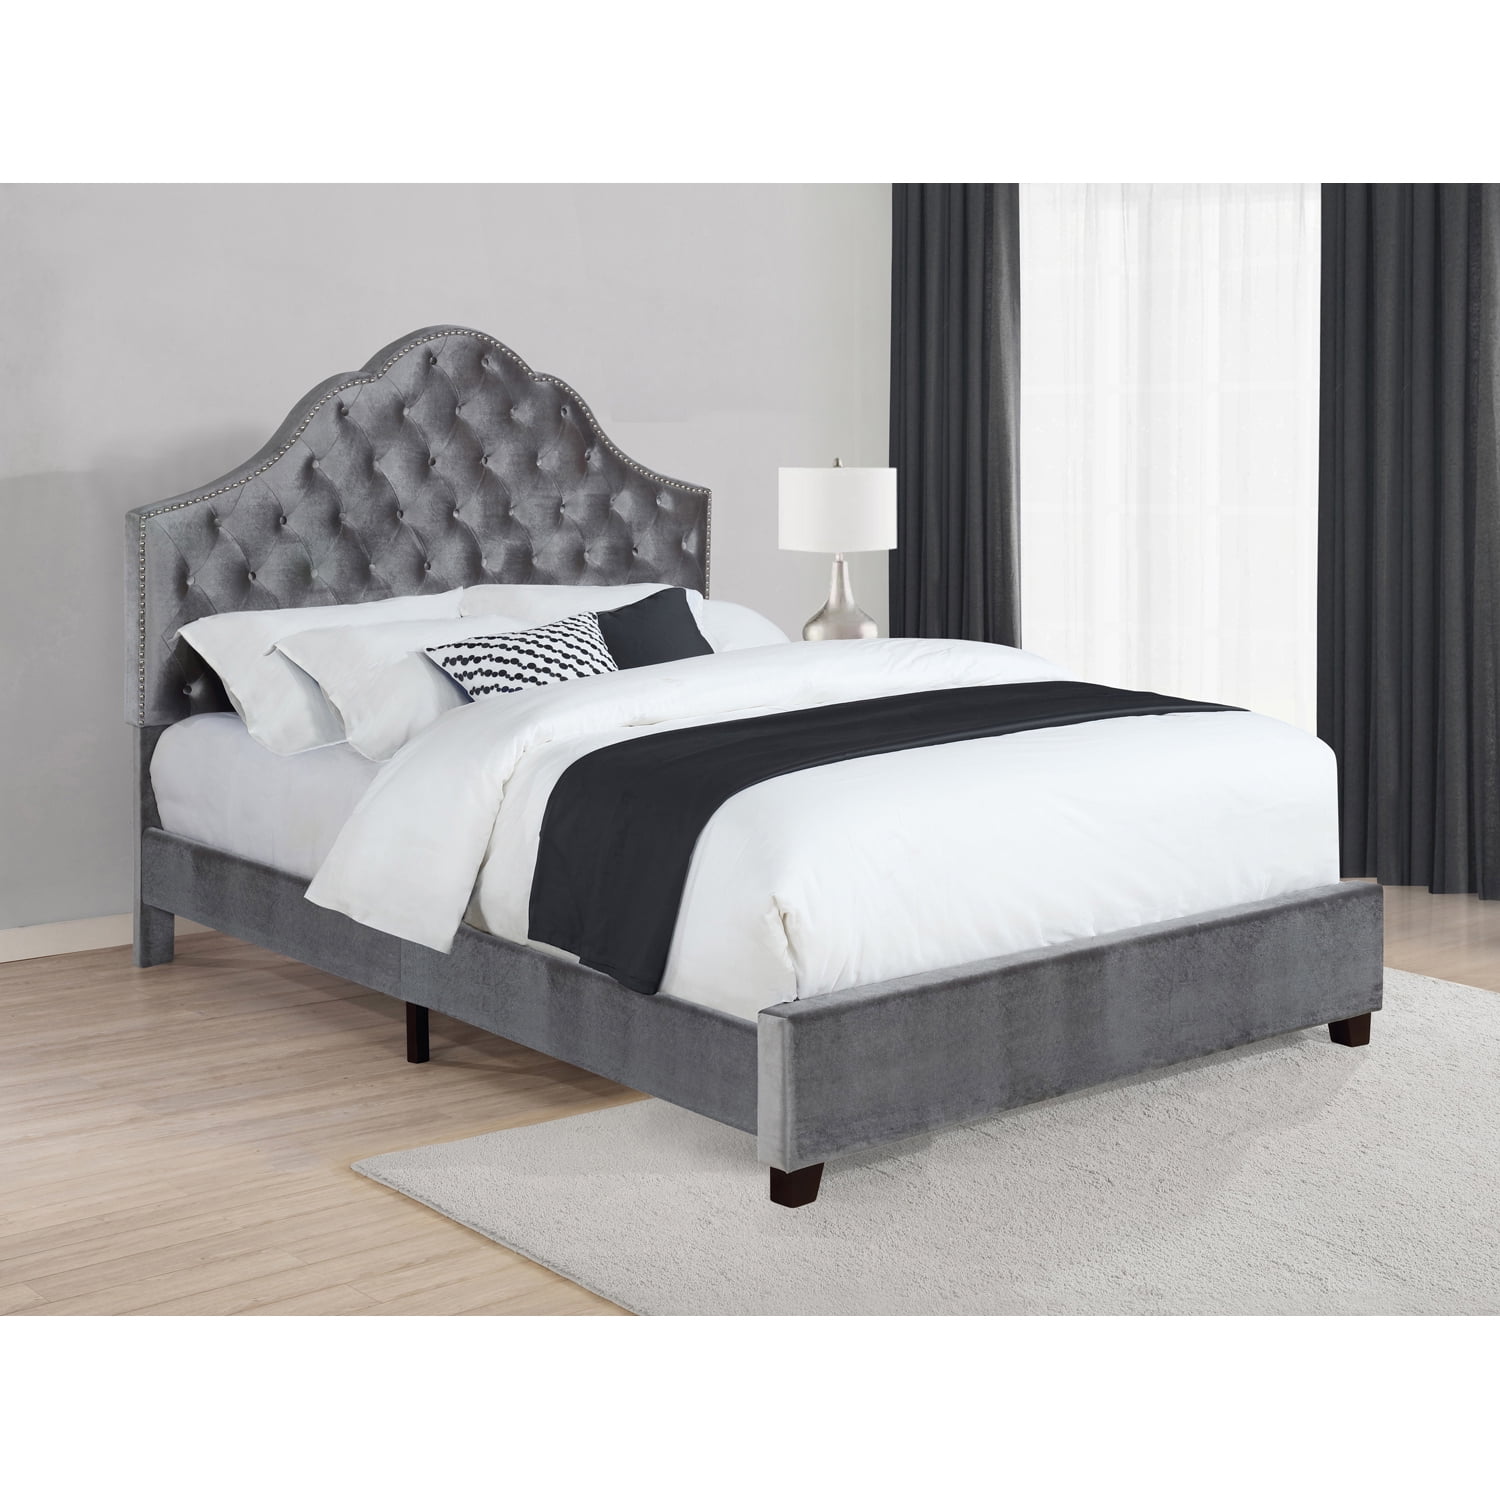 Leather Headboard Round Bed King T009, Modern White Leather Headboard Round Bed King